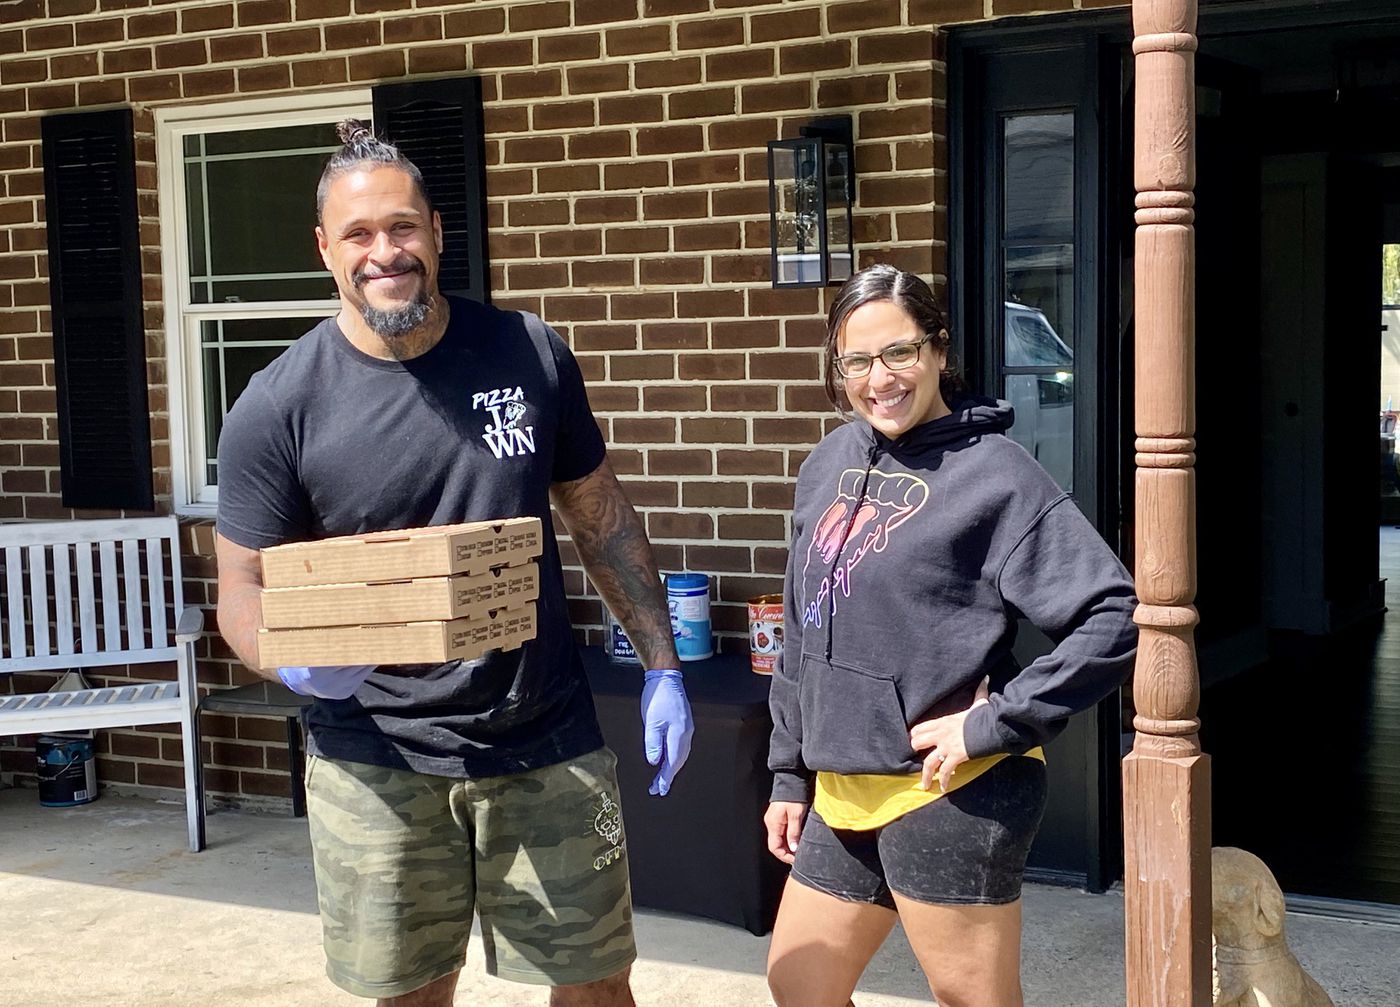 David and Ana Lee of Pizza Jawn outside of their house with pizzas for pickup.